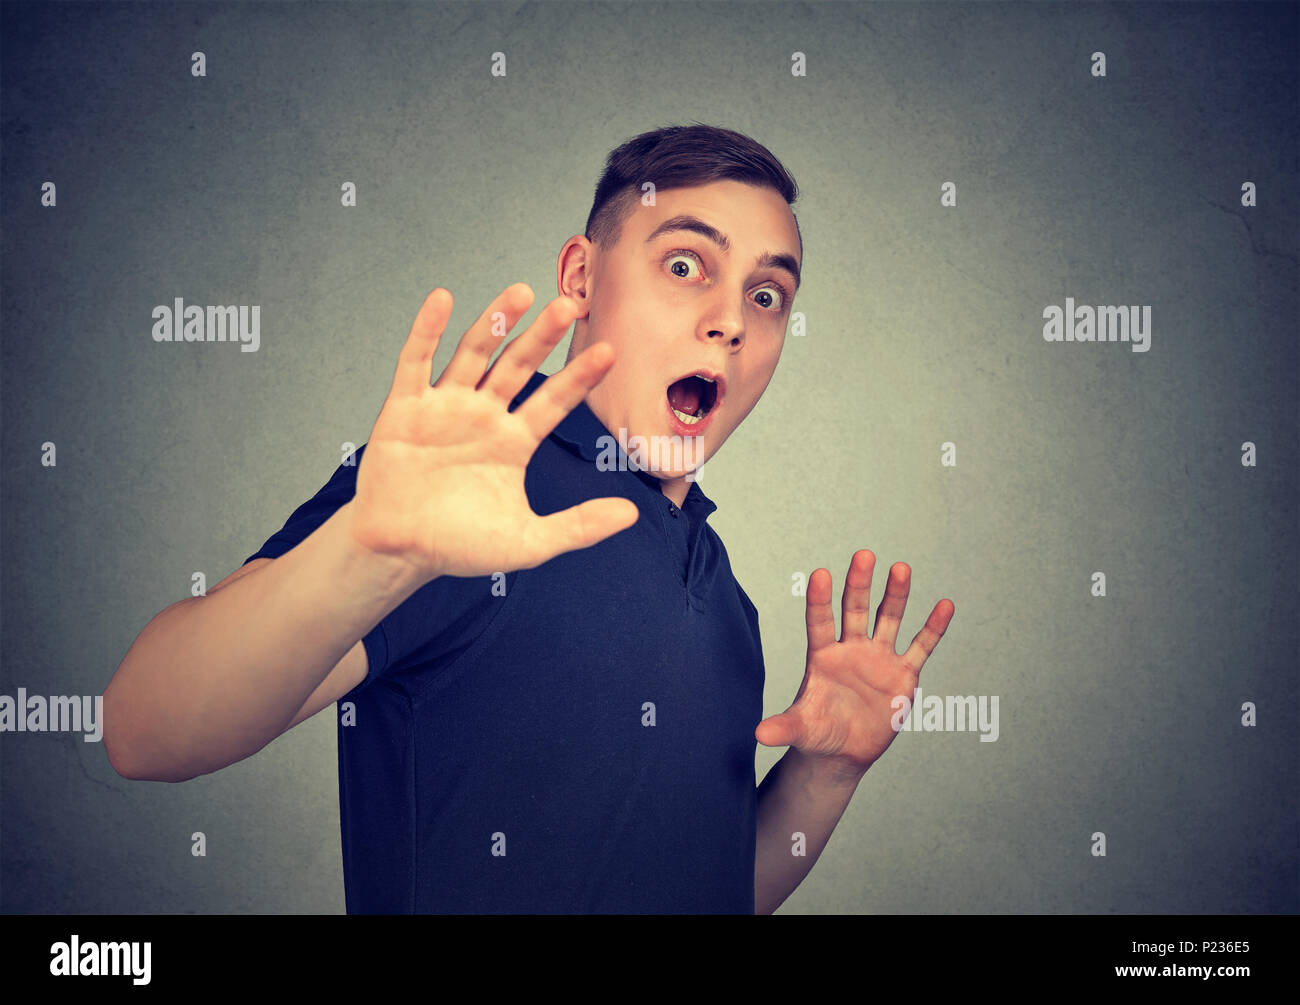 Young scared man with shocked facial expression Stock Photo